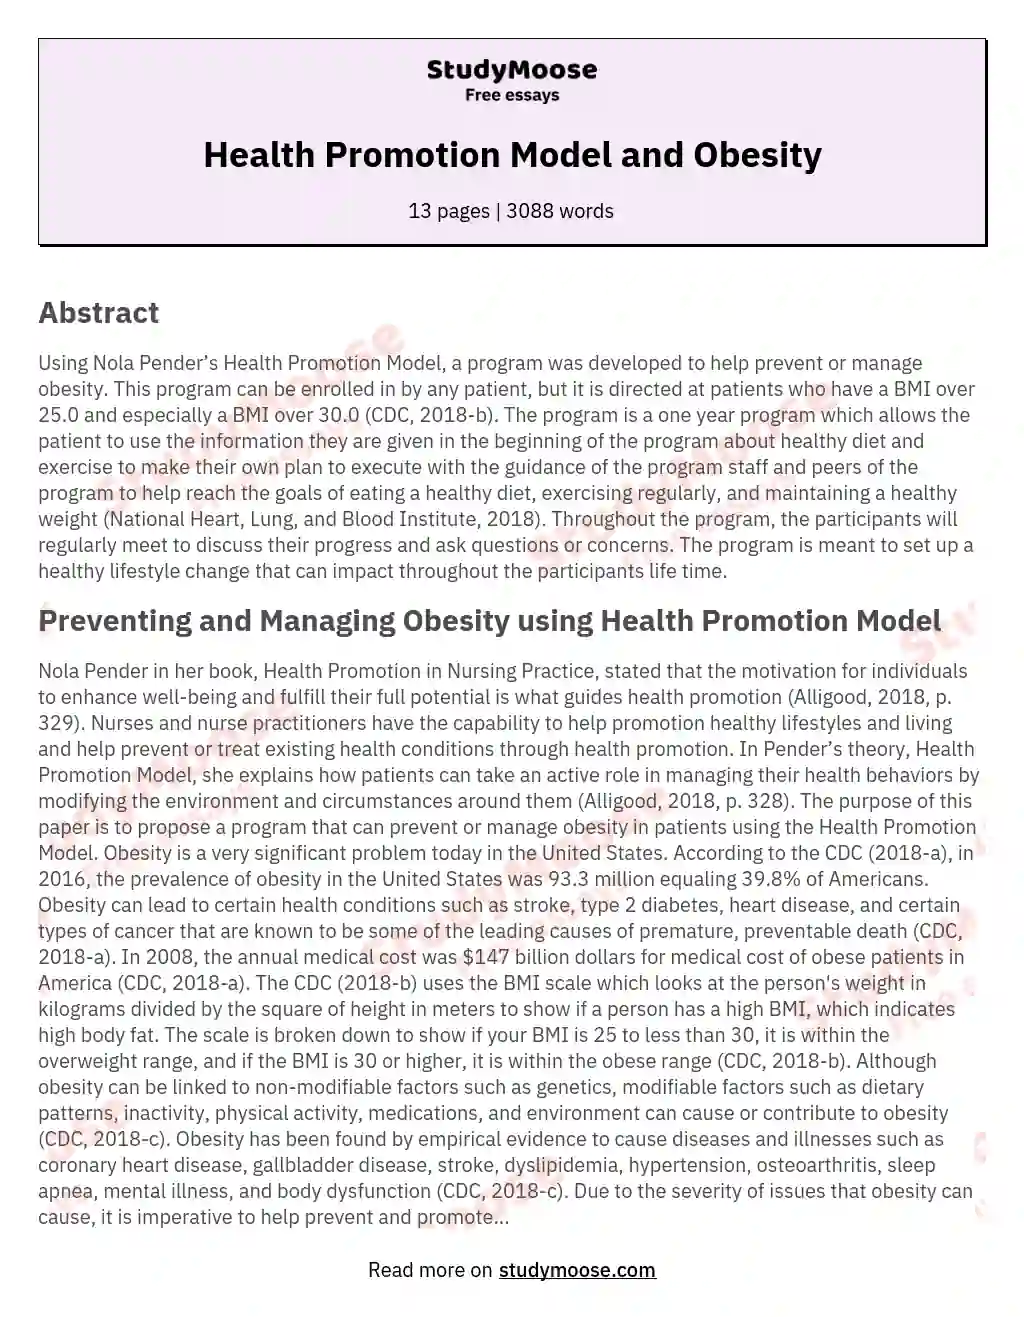 Health Promotion Model and Obesity essay